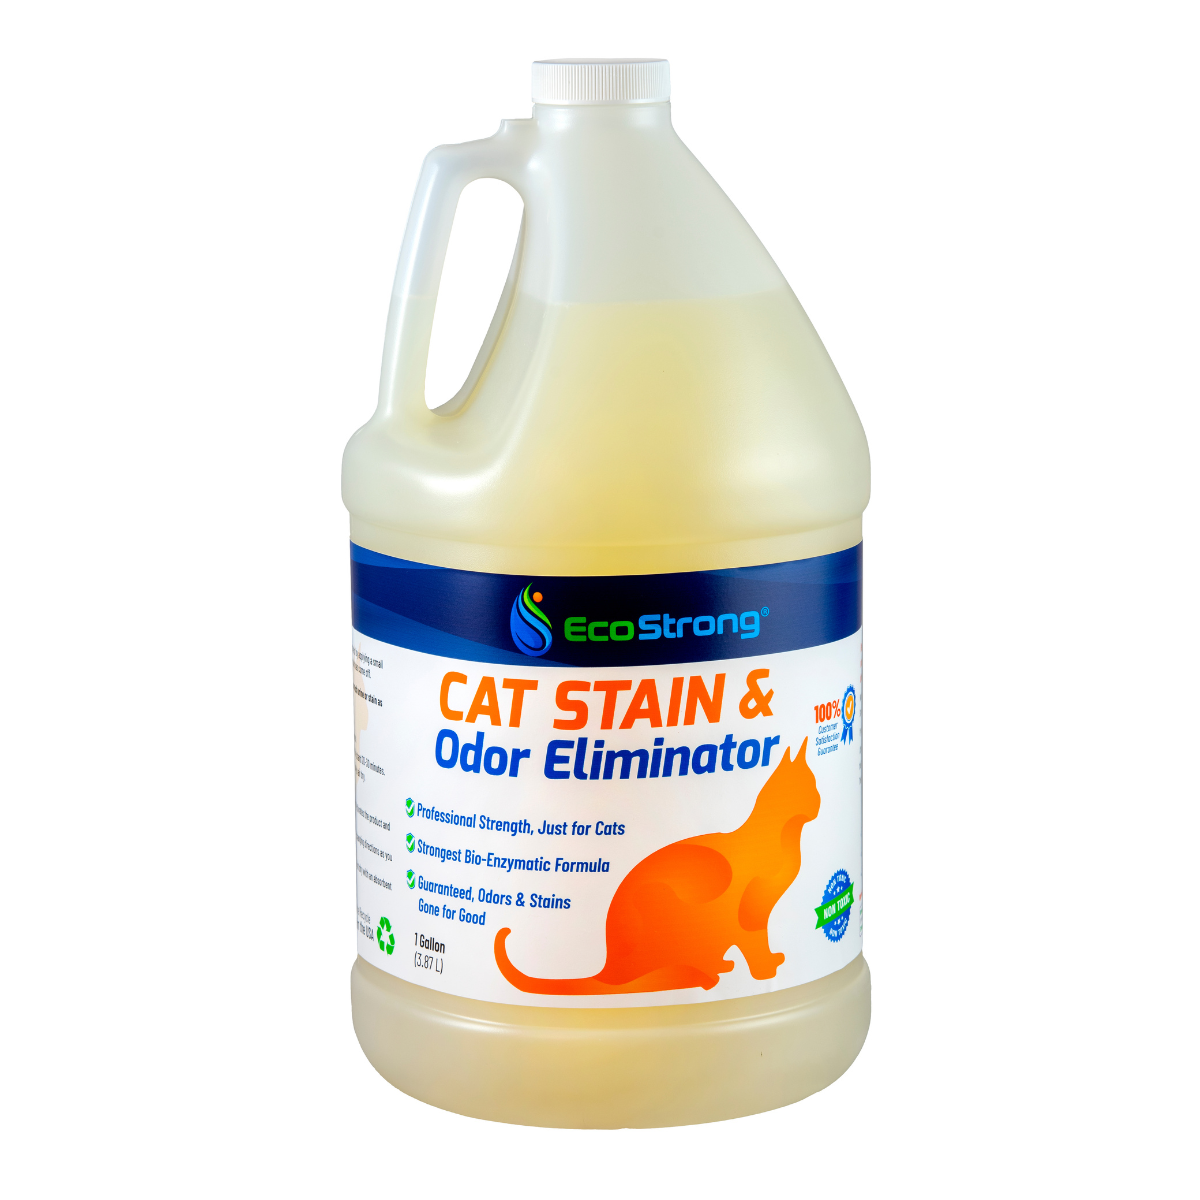 EcoStrong Cat Stain and Odor Eliminator 1 gallon #size_1-gallon-jug